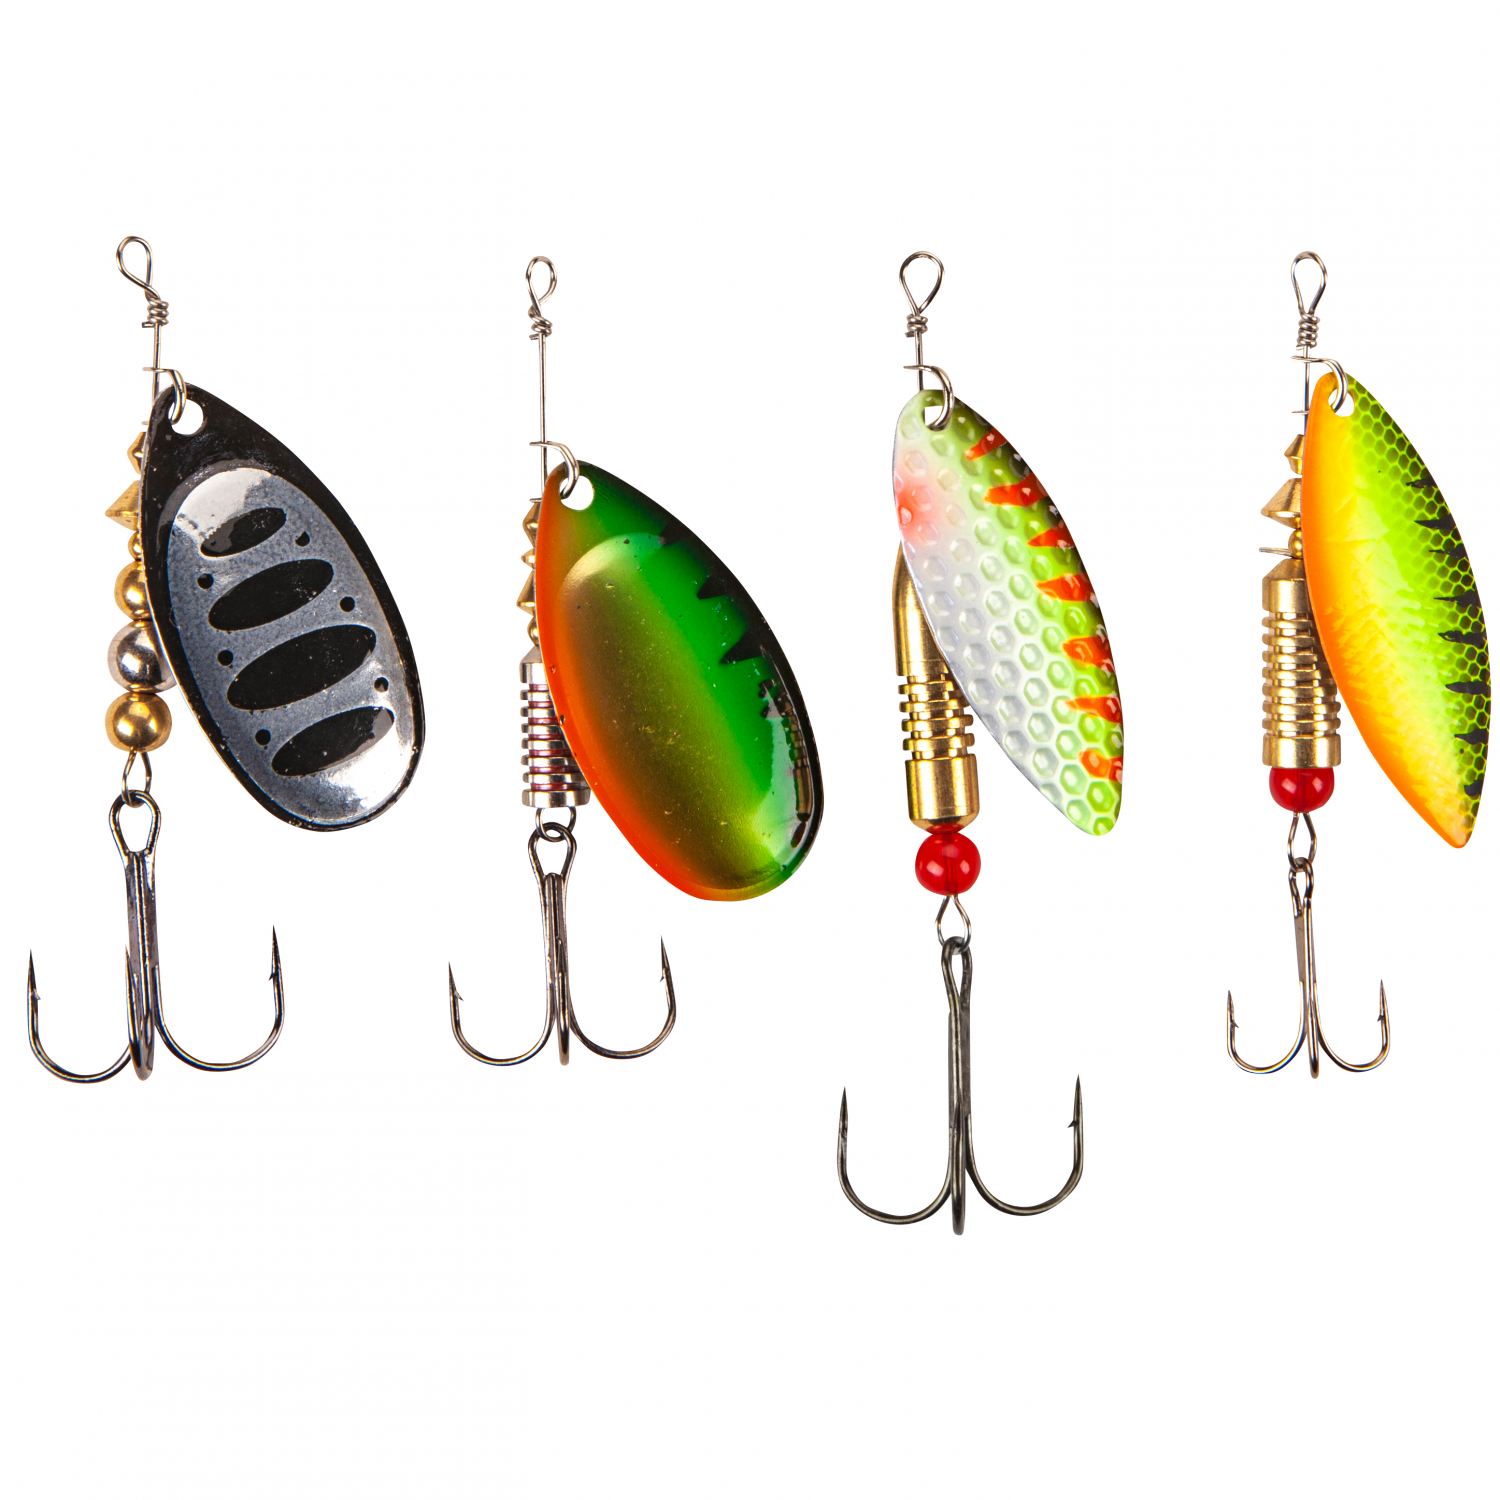 Sänger Perch + Pike Spinner Set at low prices